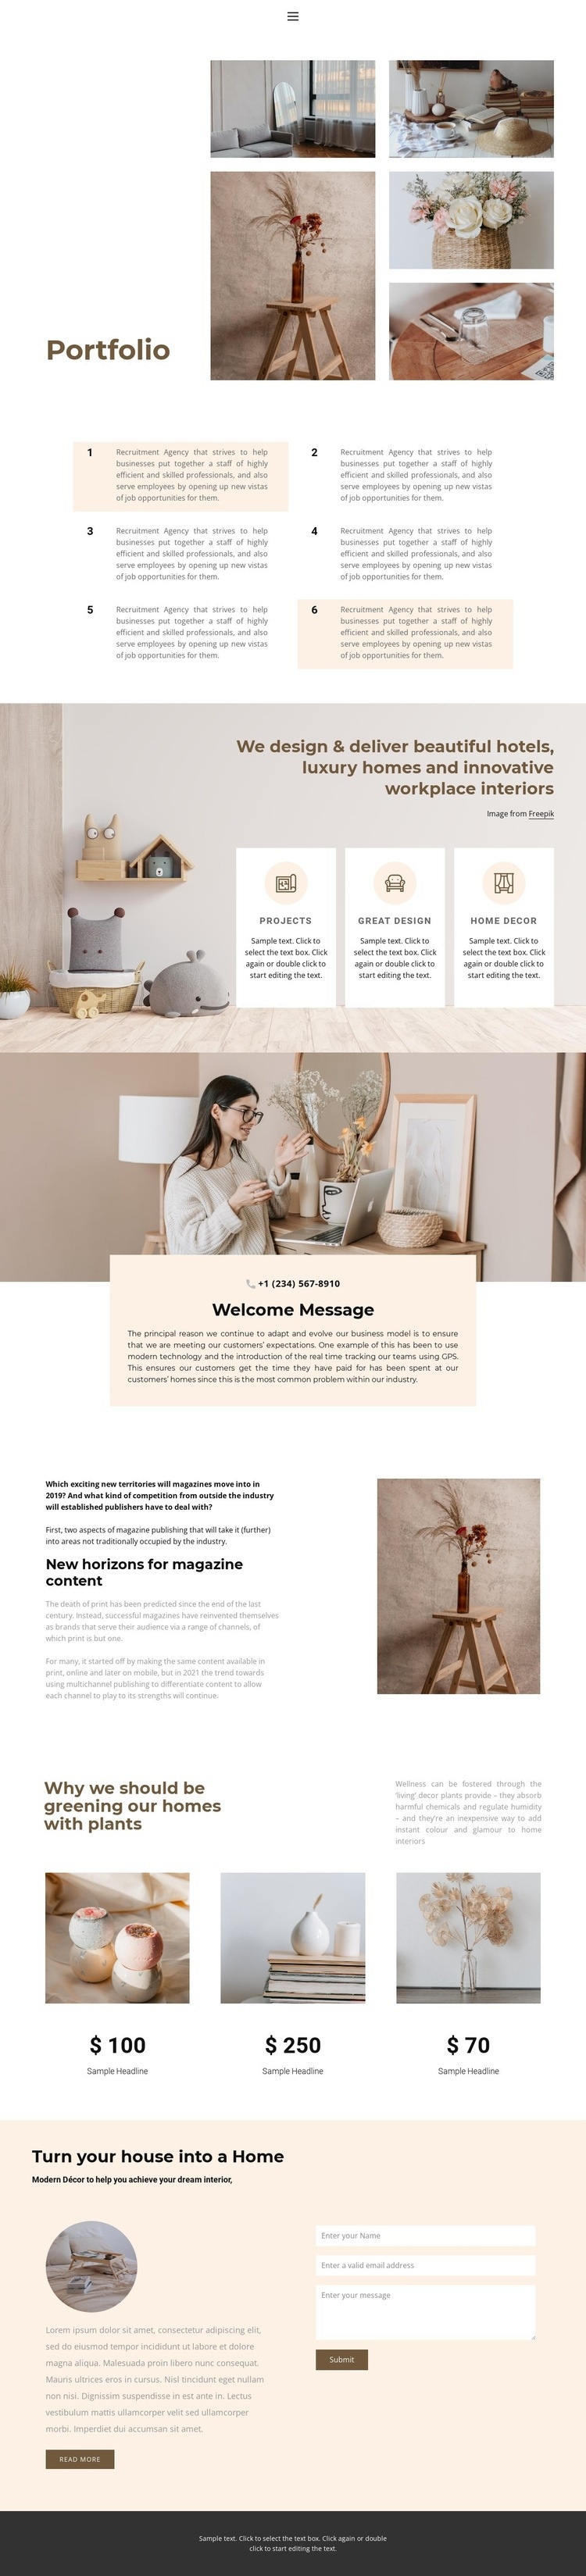 Decorate your home Wysiwyg Editor Html 